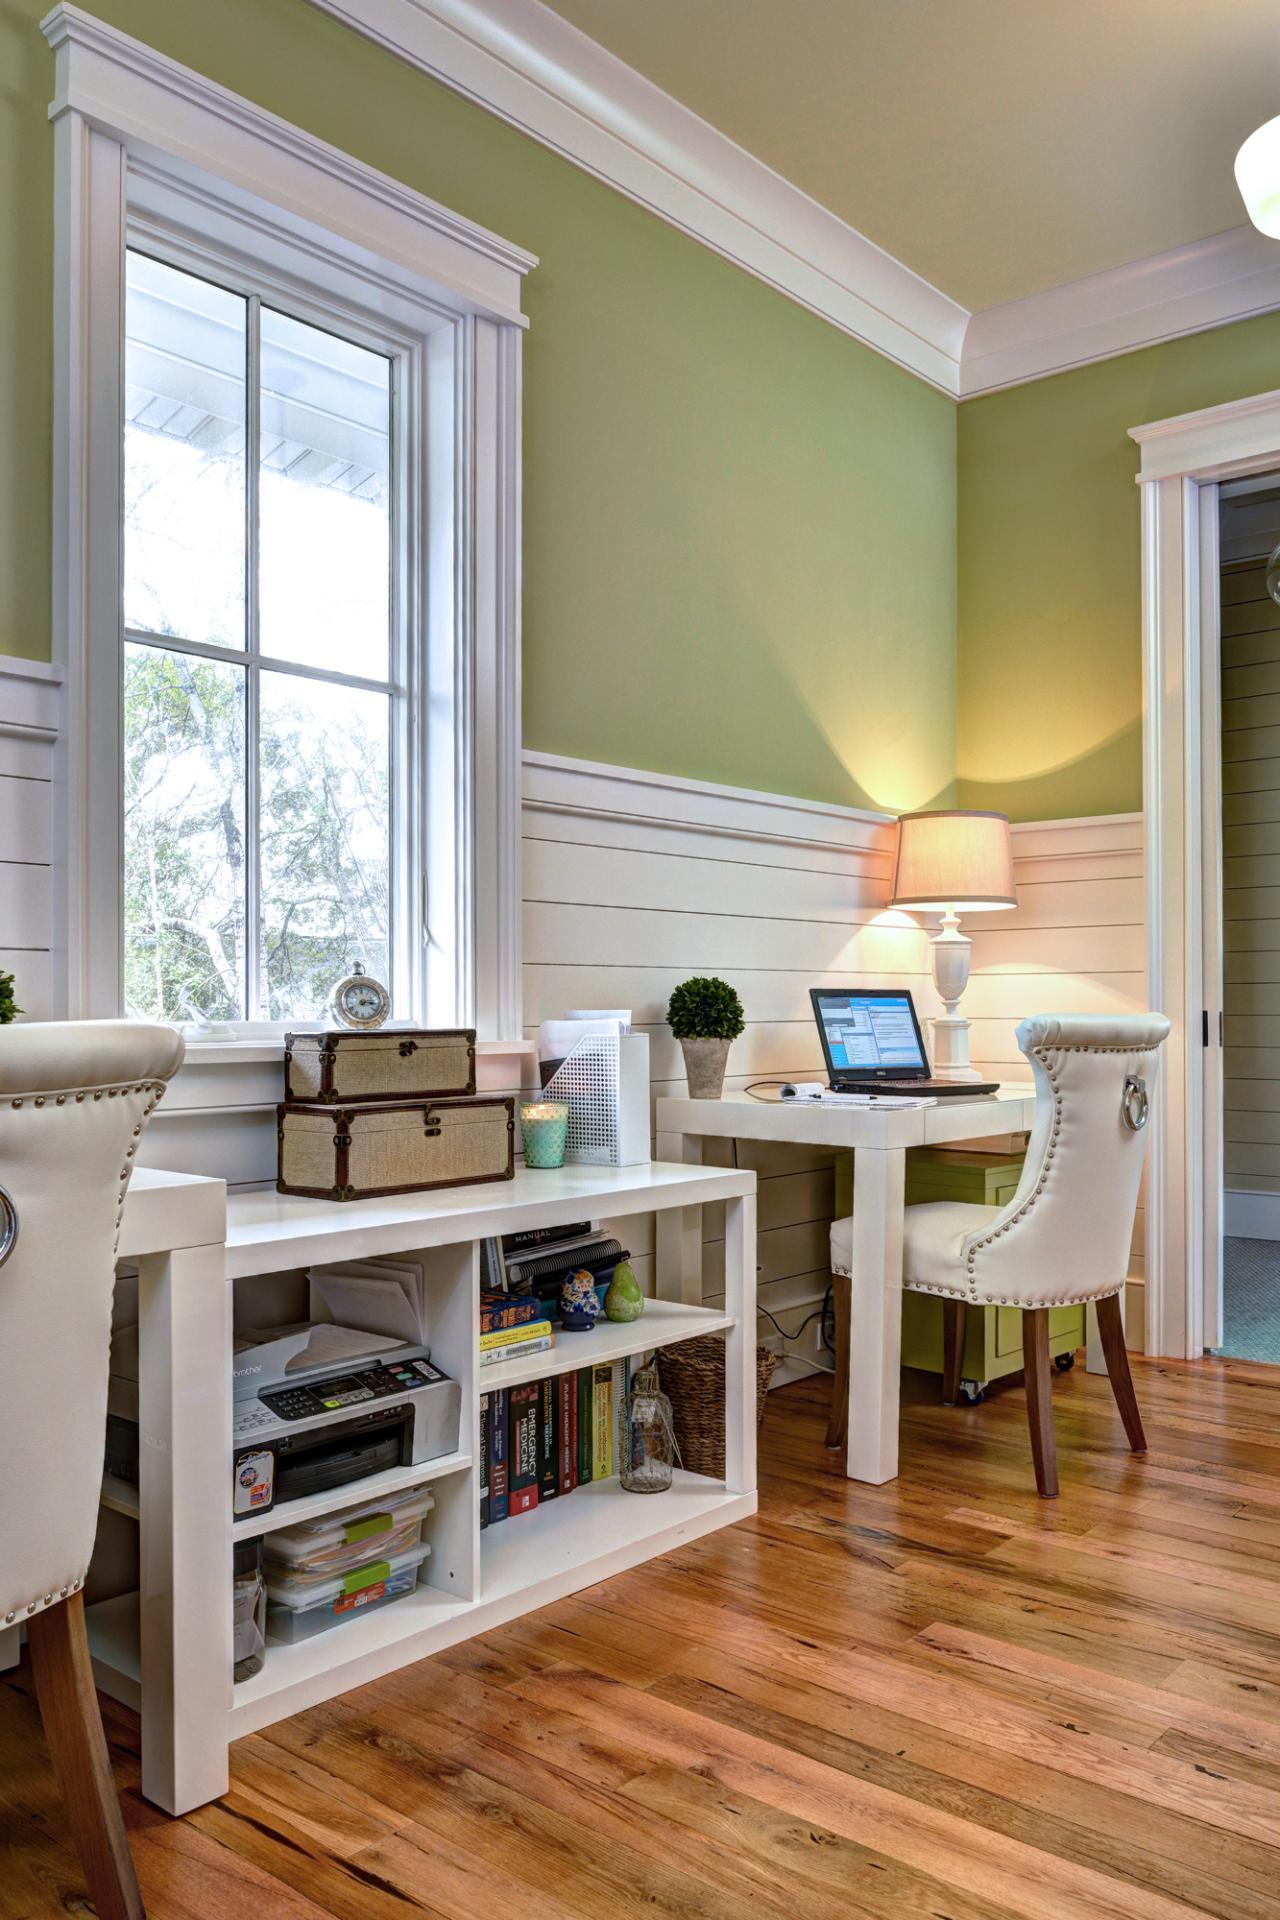 Home Office with Green Walls and Costal-style Wainscoting